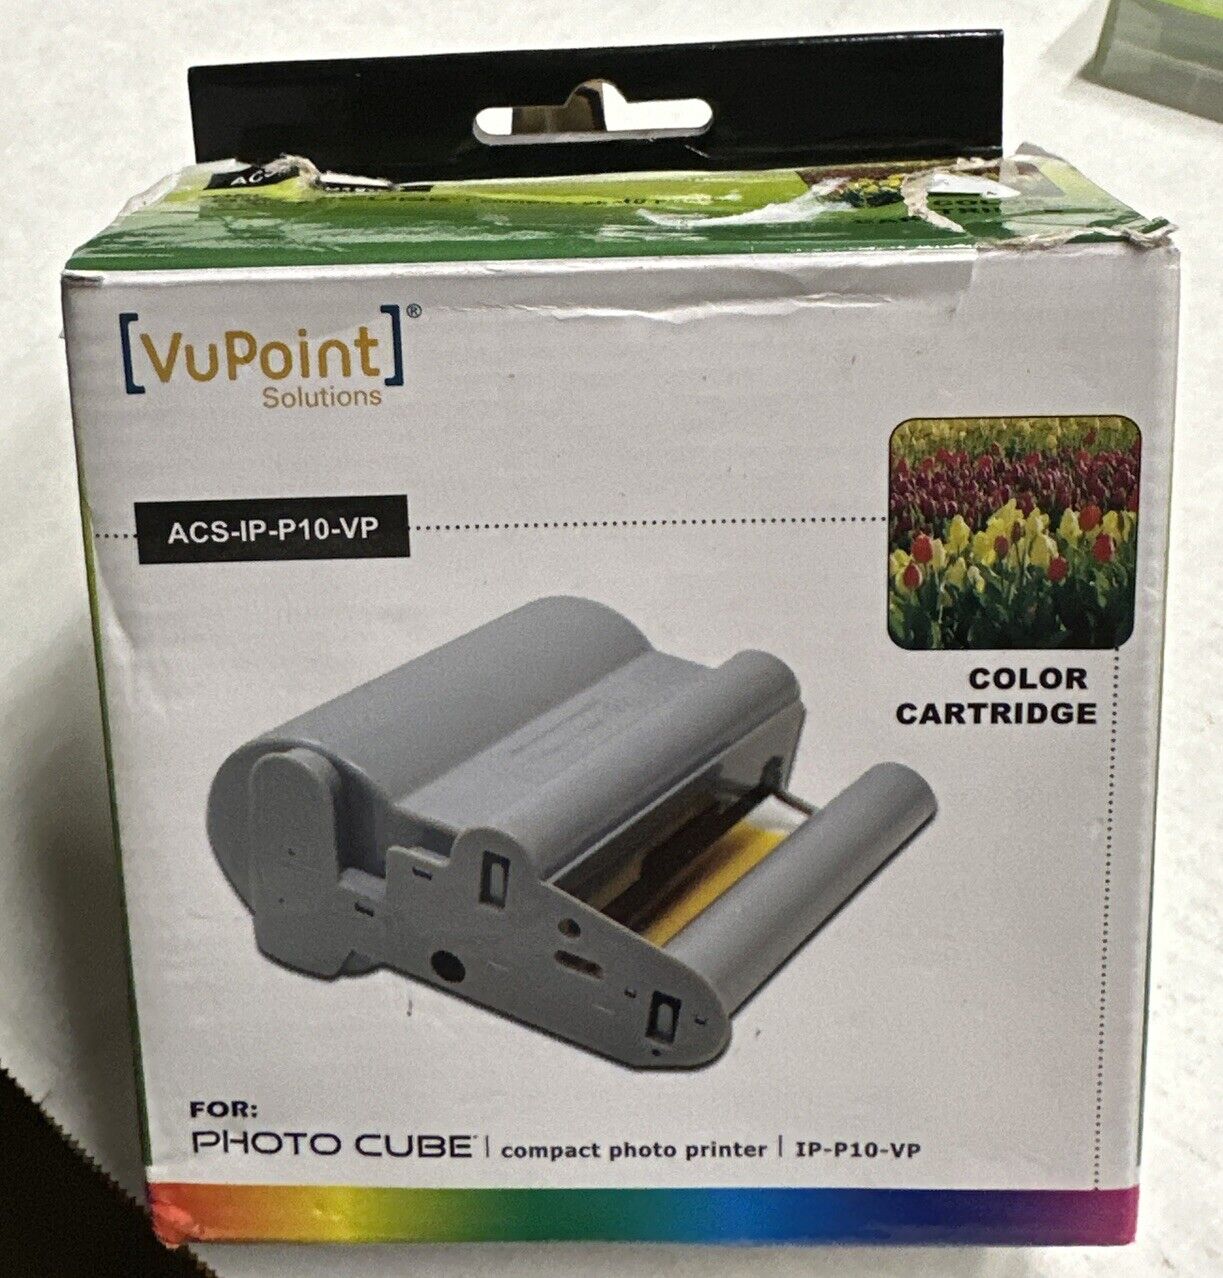 VuPoint Solutions ACS-IP-P10-VP Photo Cube Color Cartridge Ink/Paper  SEALED IN